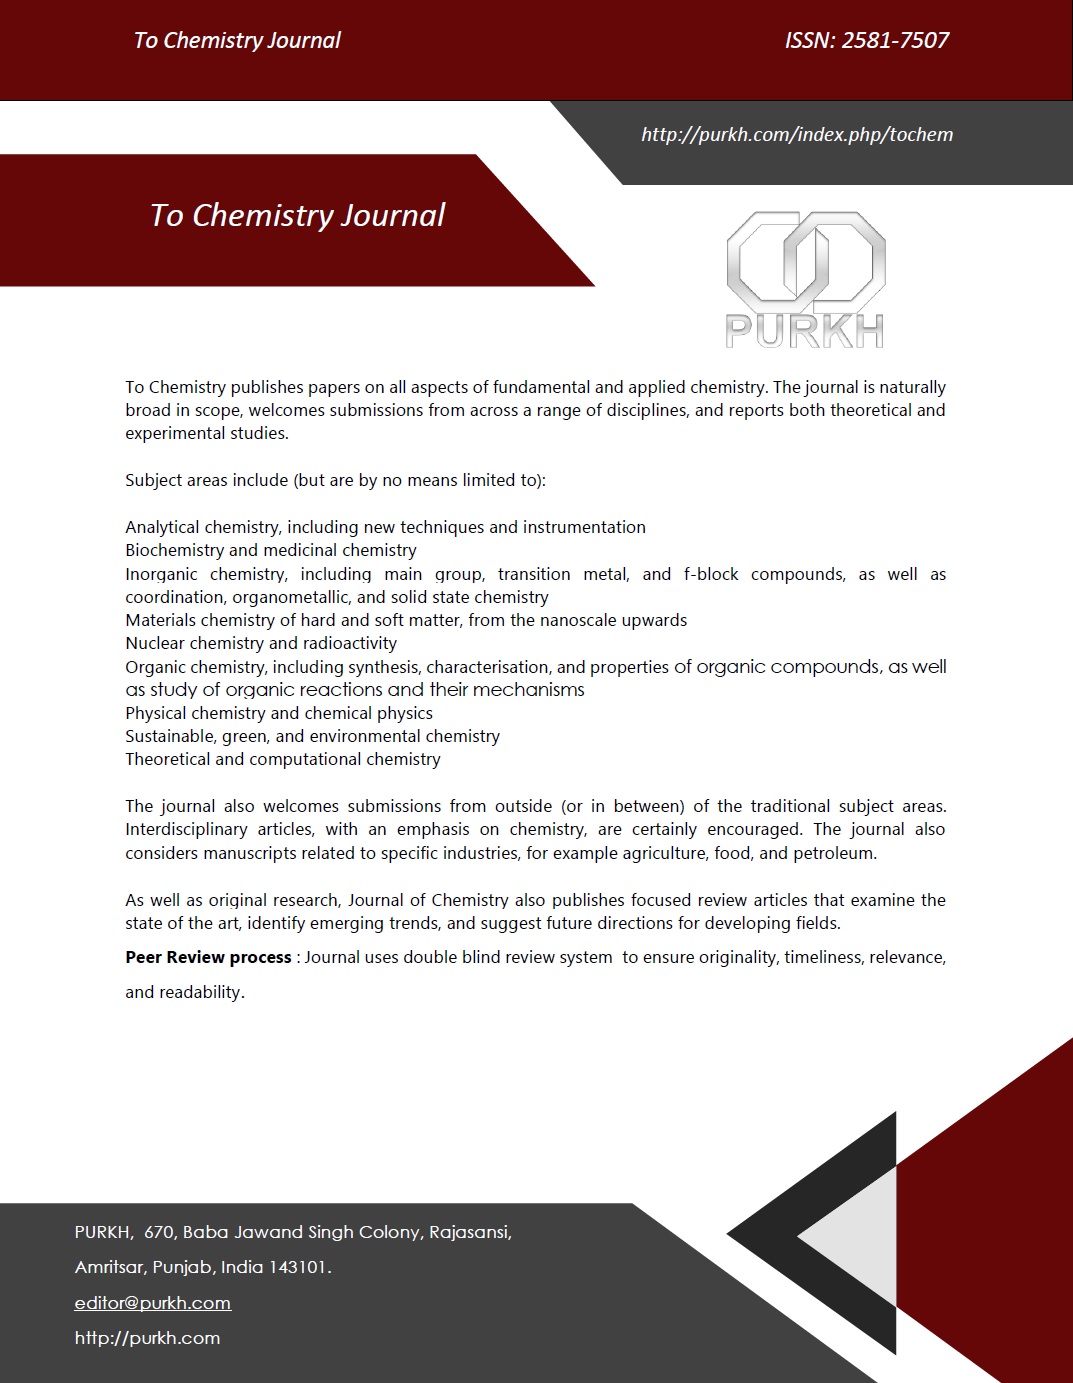 To Chemistry Journal